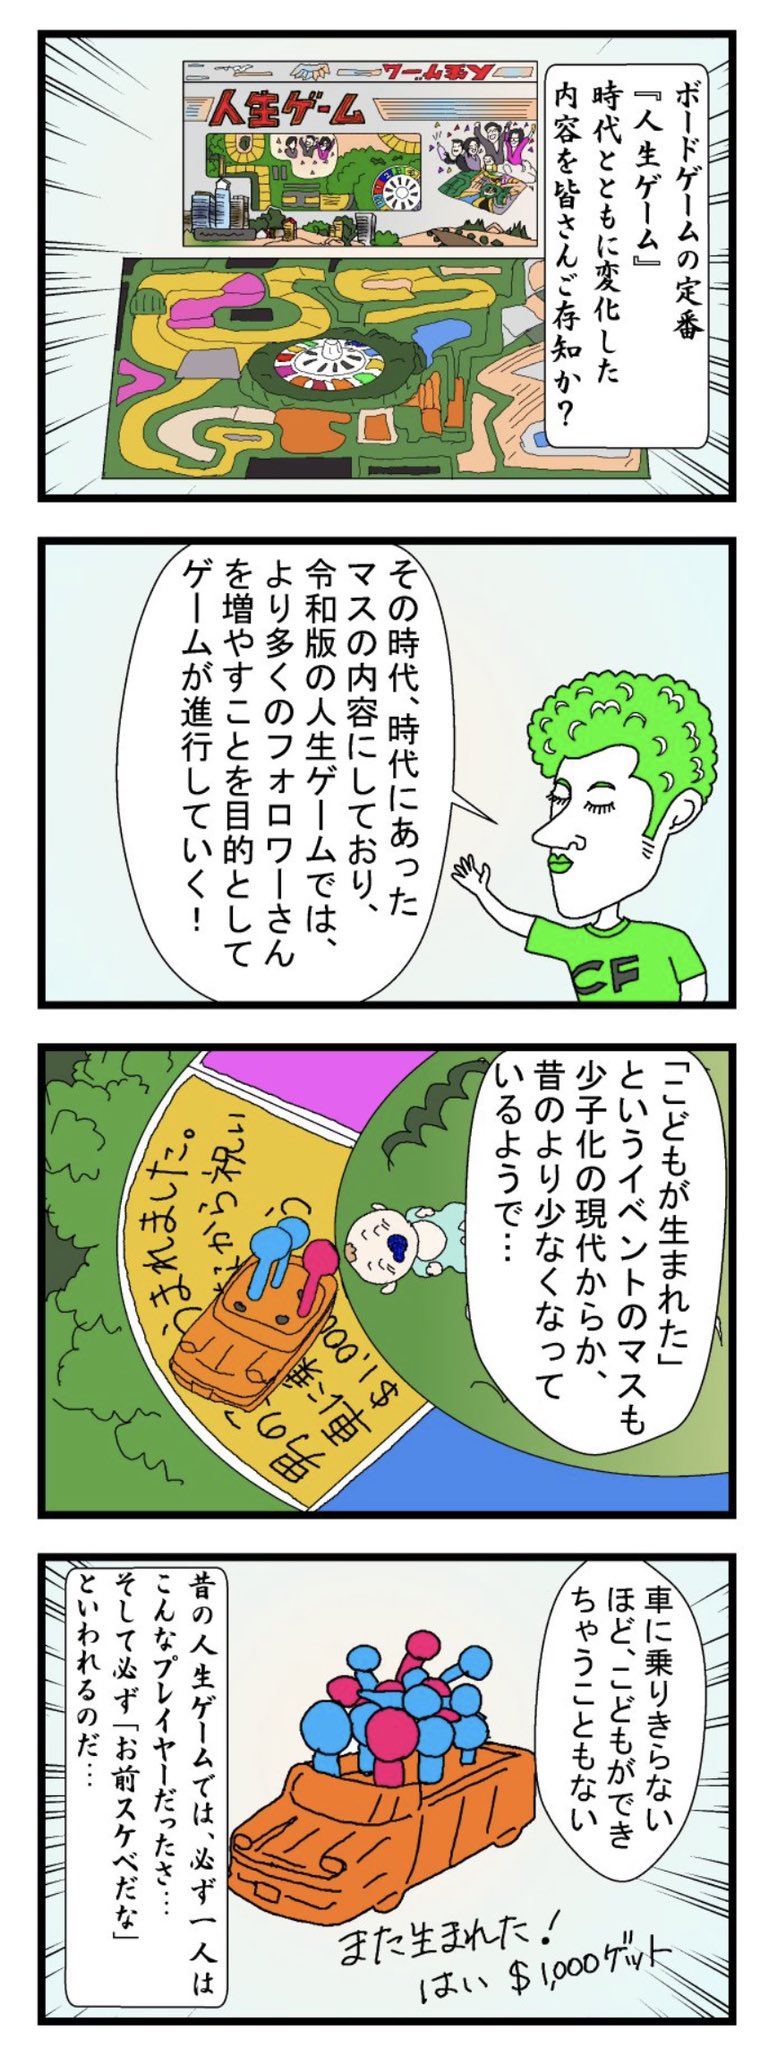 Clearface World ギャグ漫画 4コマ漫画 4コママンガ 漫画家 Twitter漫画 人生ゲーム イラスト 漫画 まんが あるある 人生ゲーム令和版 人生ゲーム T Co 2yydplrsht Twitter